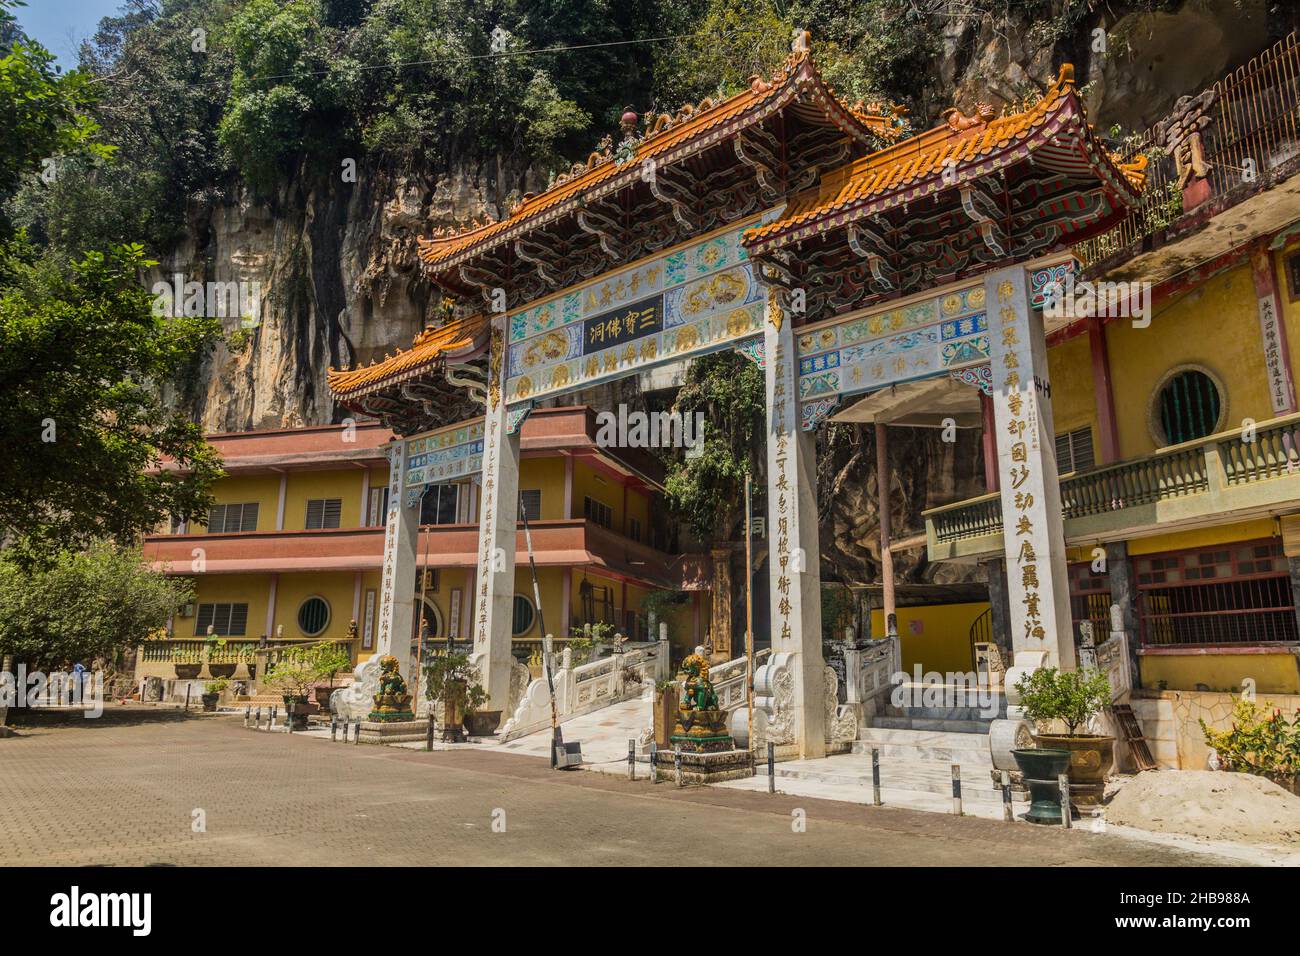 IPOH, MALAYASIA - MARCH 25, 2018: Gate at Sam Poh Tong Temple in Ipoh, Malaysia. Stock Photo